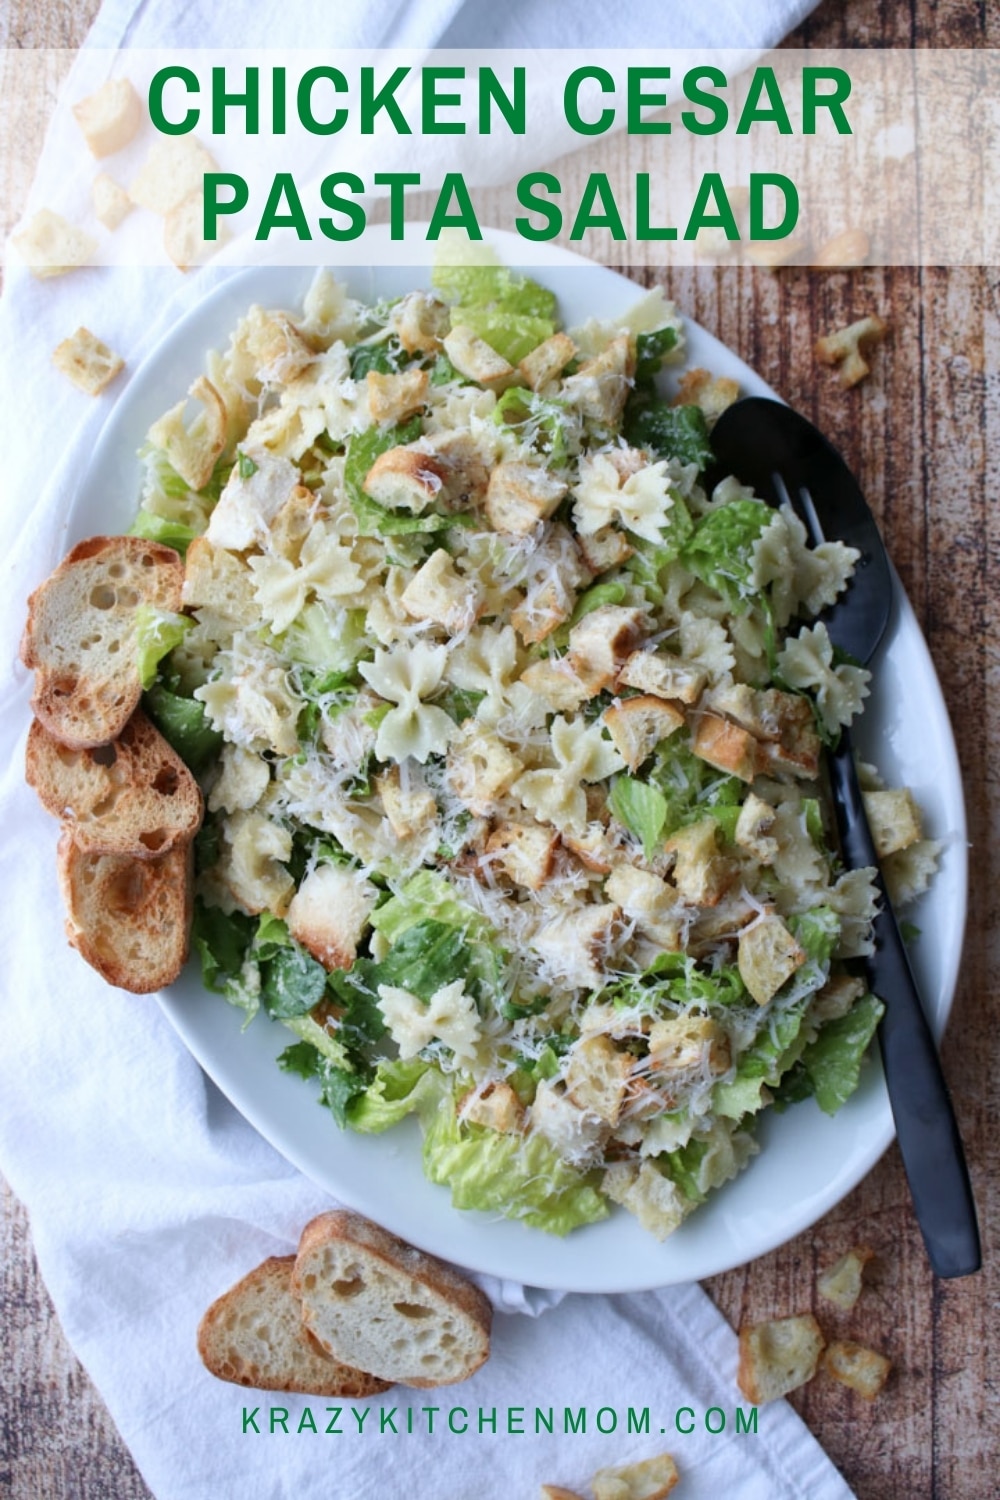 This salad platter is the perfect combination of a classic caesar salad with creamy satisfying farfalle pasta.  via @krazykitchenmom